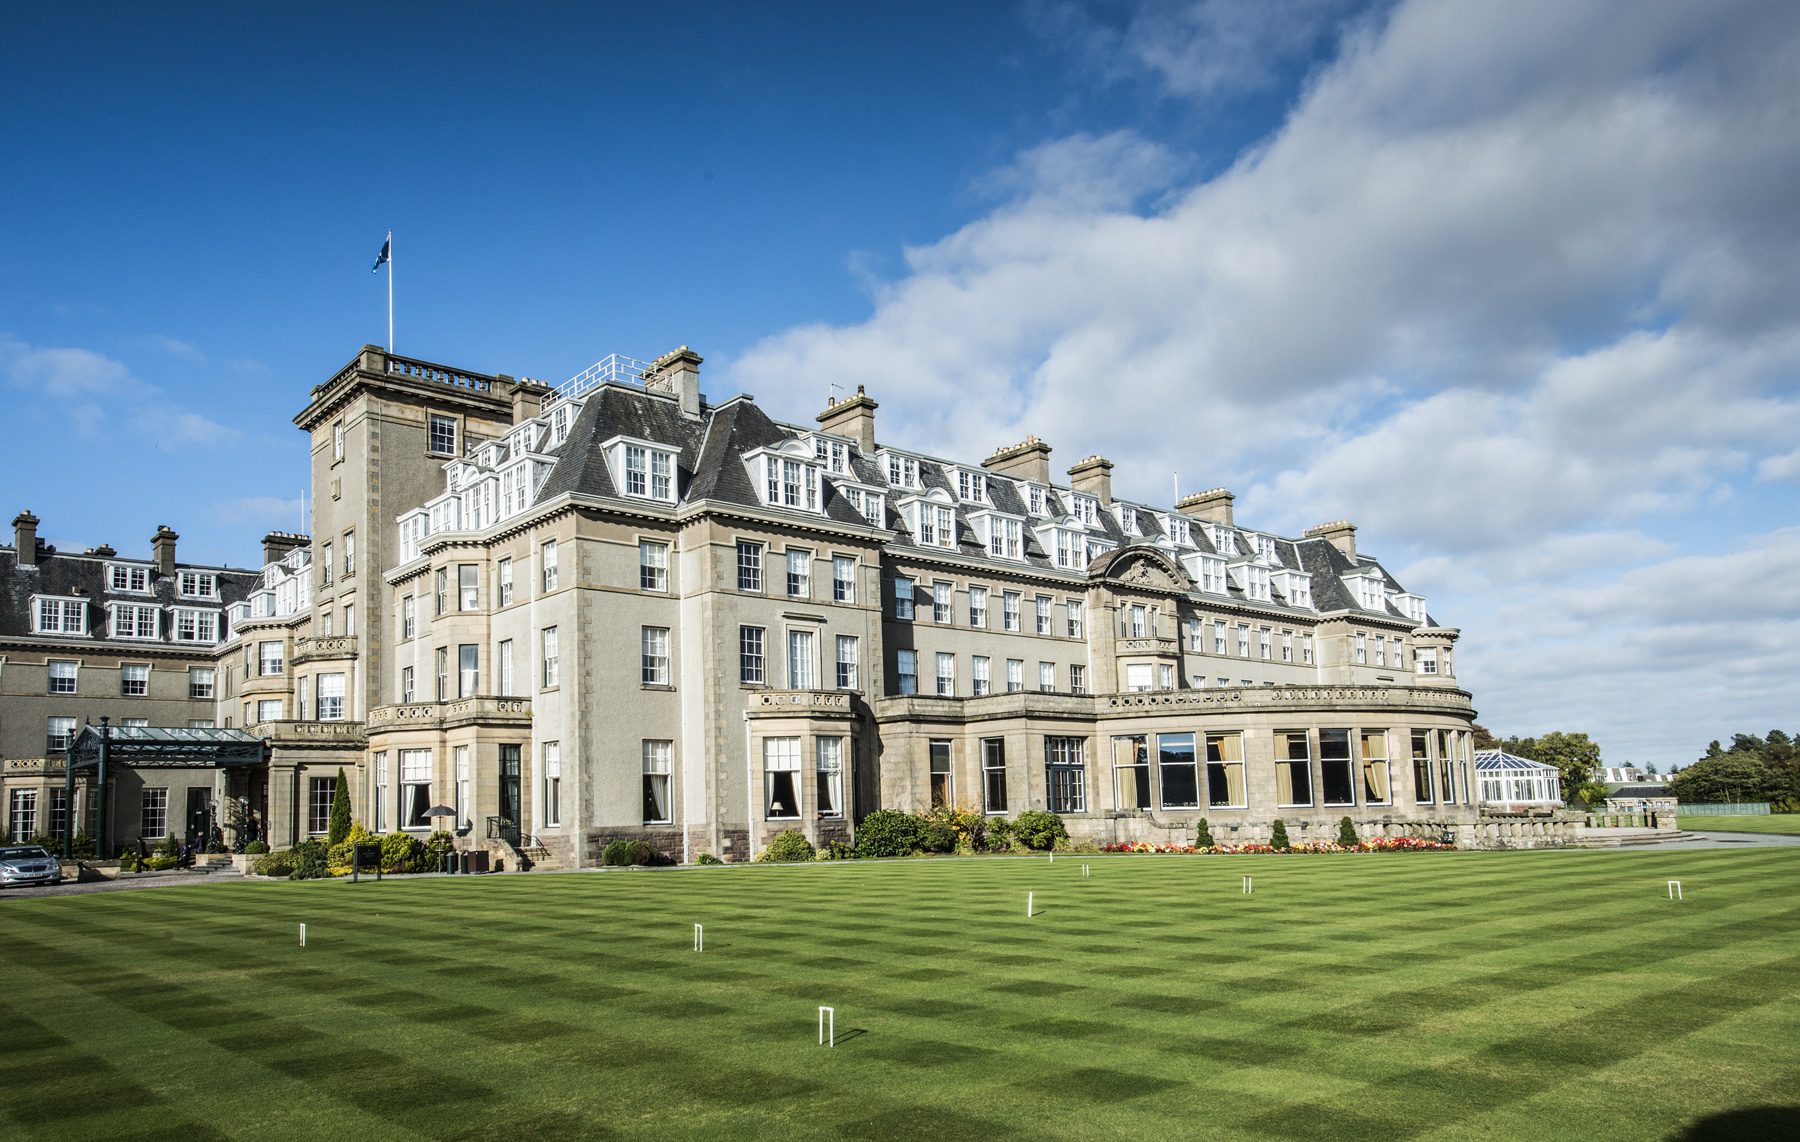 Gleneagles is set in magnificent grounds